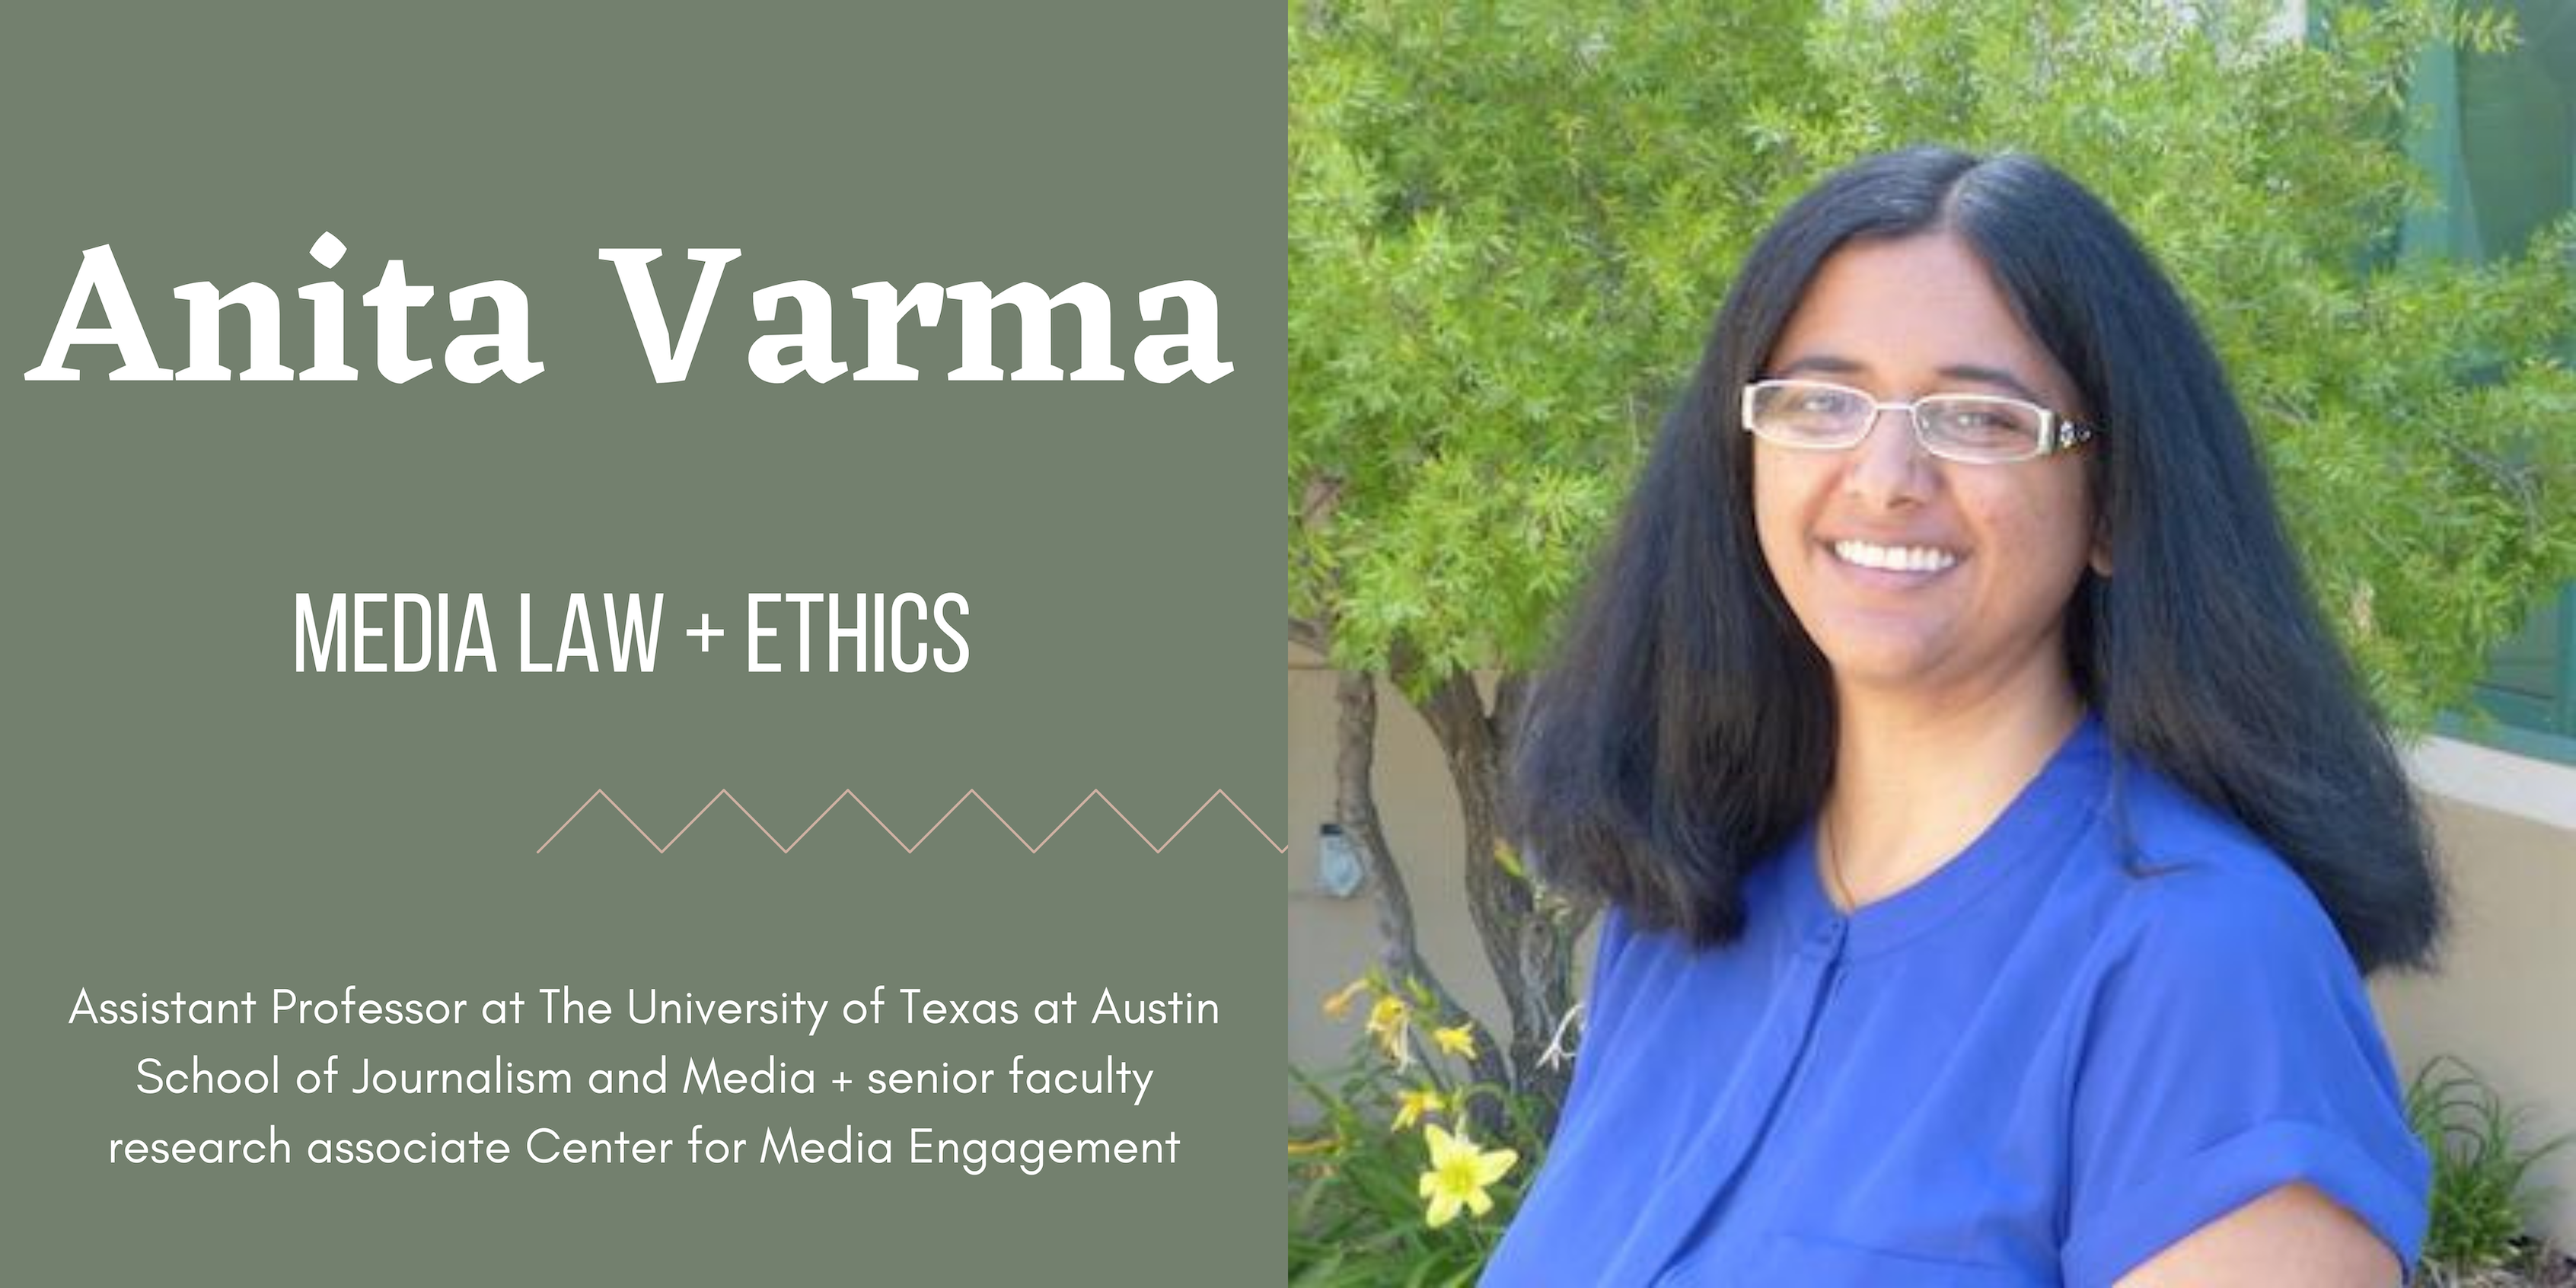 On the right is a photo of Assistant Professor Anita Varma. On the left on a green background is white text that says, "Anita Varma," "Media Law + Ethics" and her job title.